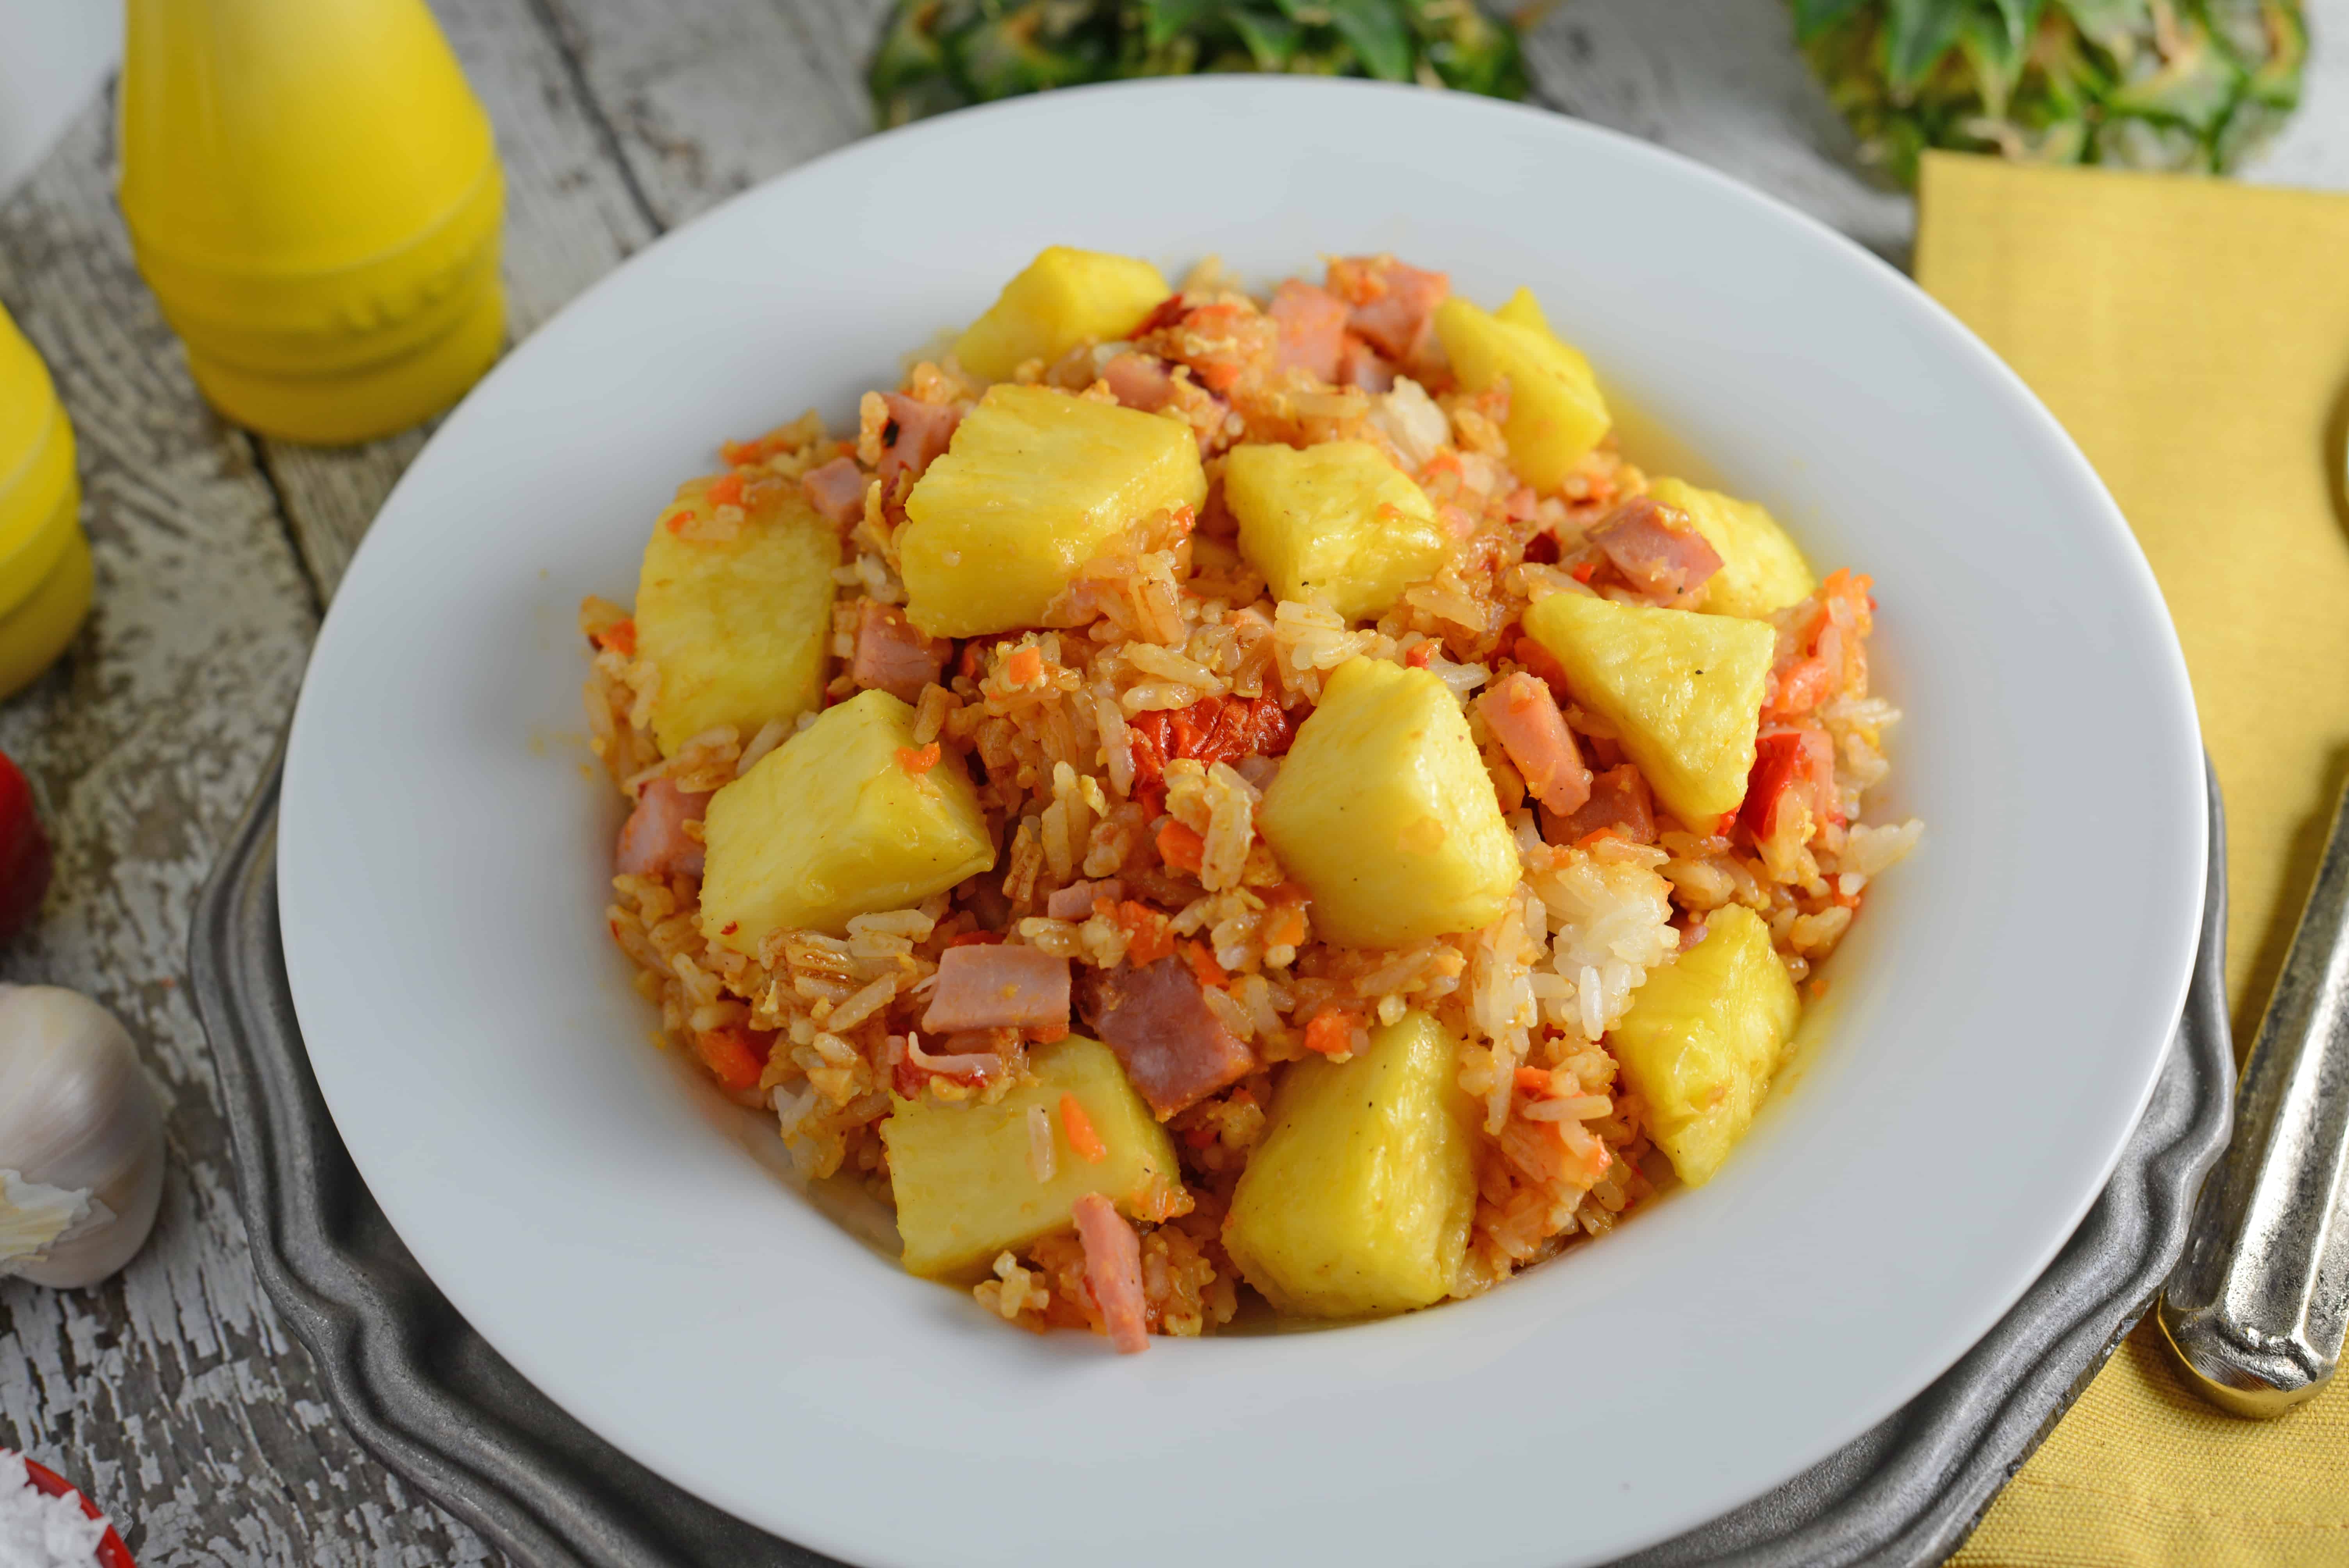 Pineapple Fried Rice Recipe - A quick and easy weeknight meal that's so much cheaper, tastier and healthier than take-out! Make it a vegetarian meal or add ham. www.savoryexperiments.com